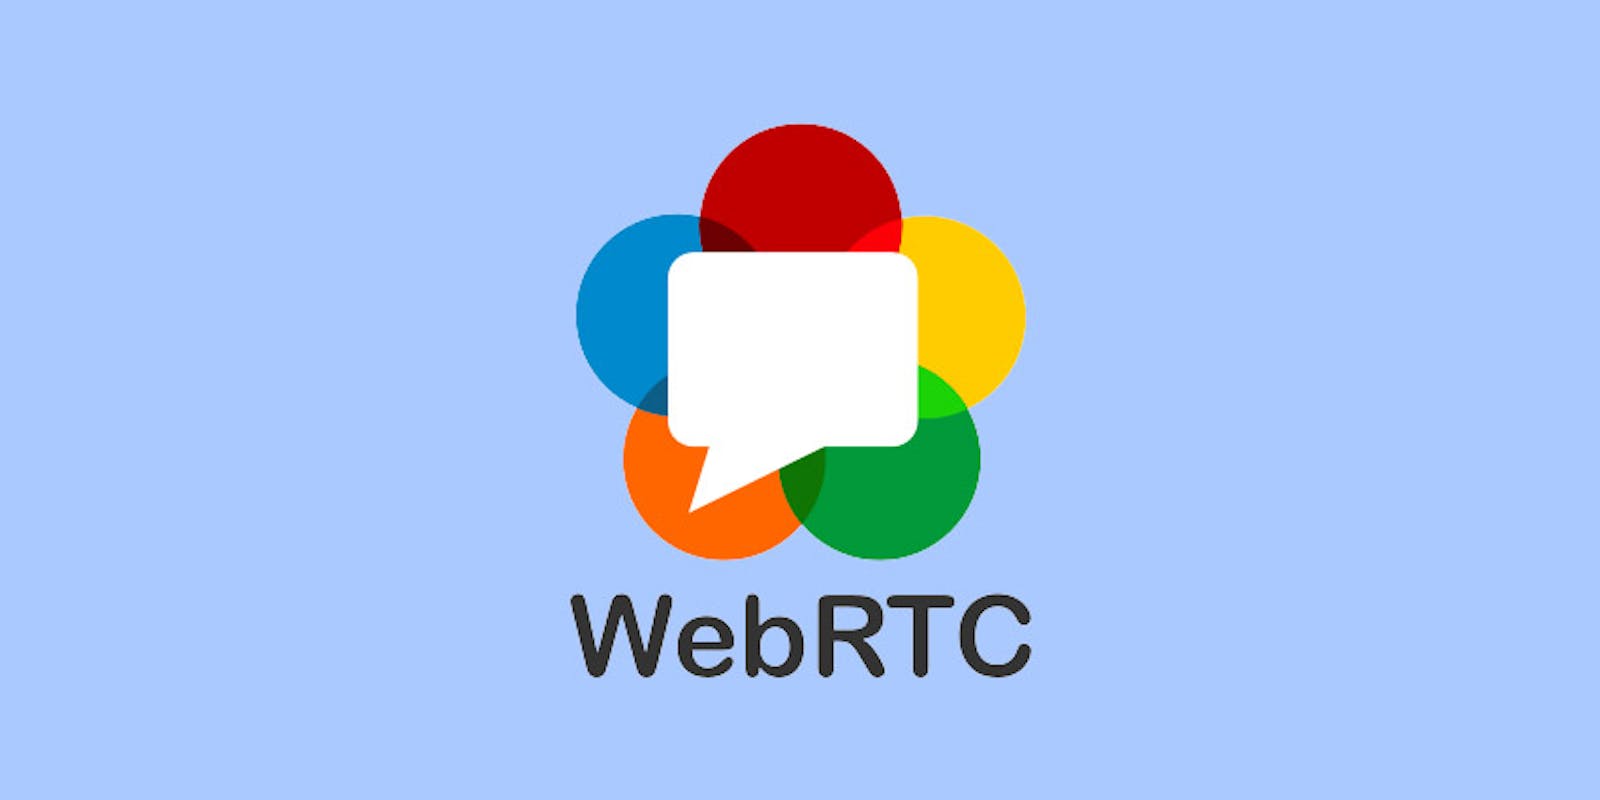 The magic of WebRTC: video communication made easy with WebRTC